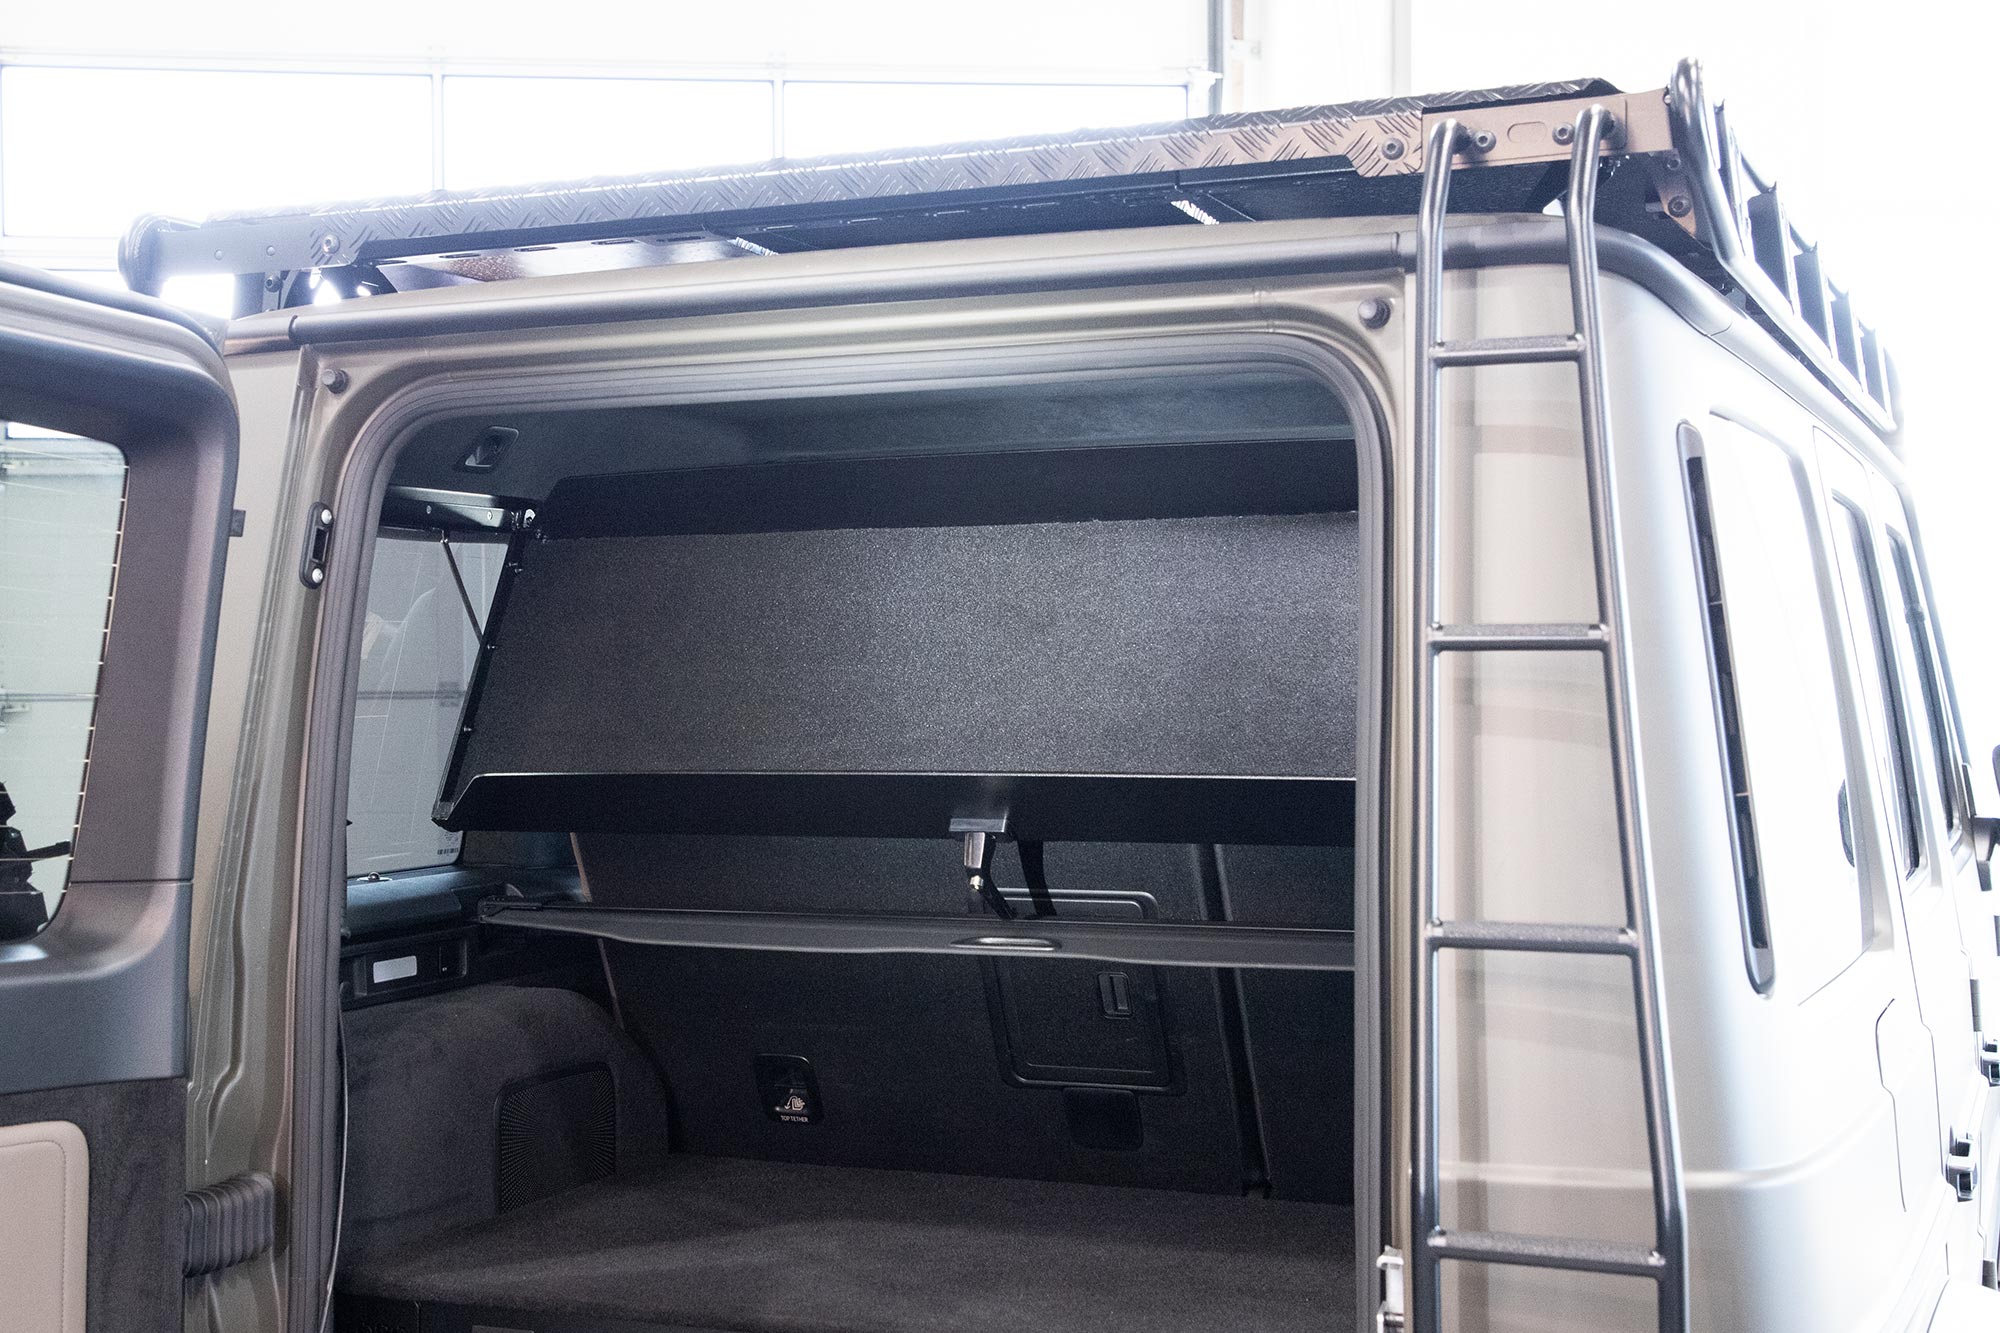 ORC roof box/weapon safe, foldable + lockable Mercedes G from 2018 on, black